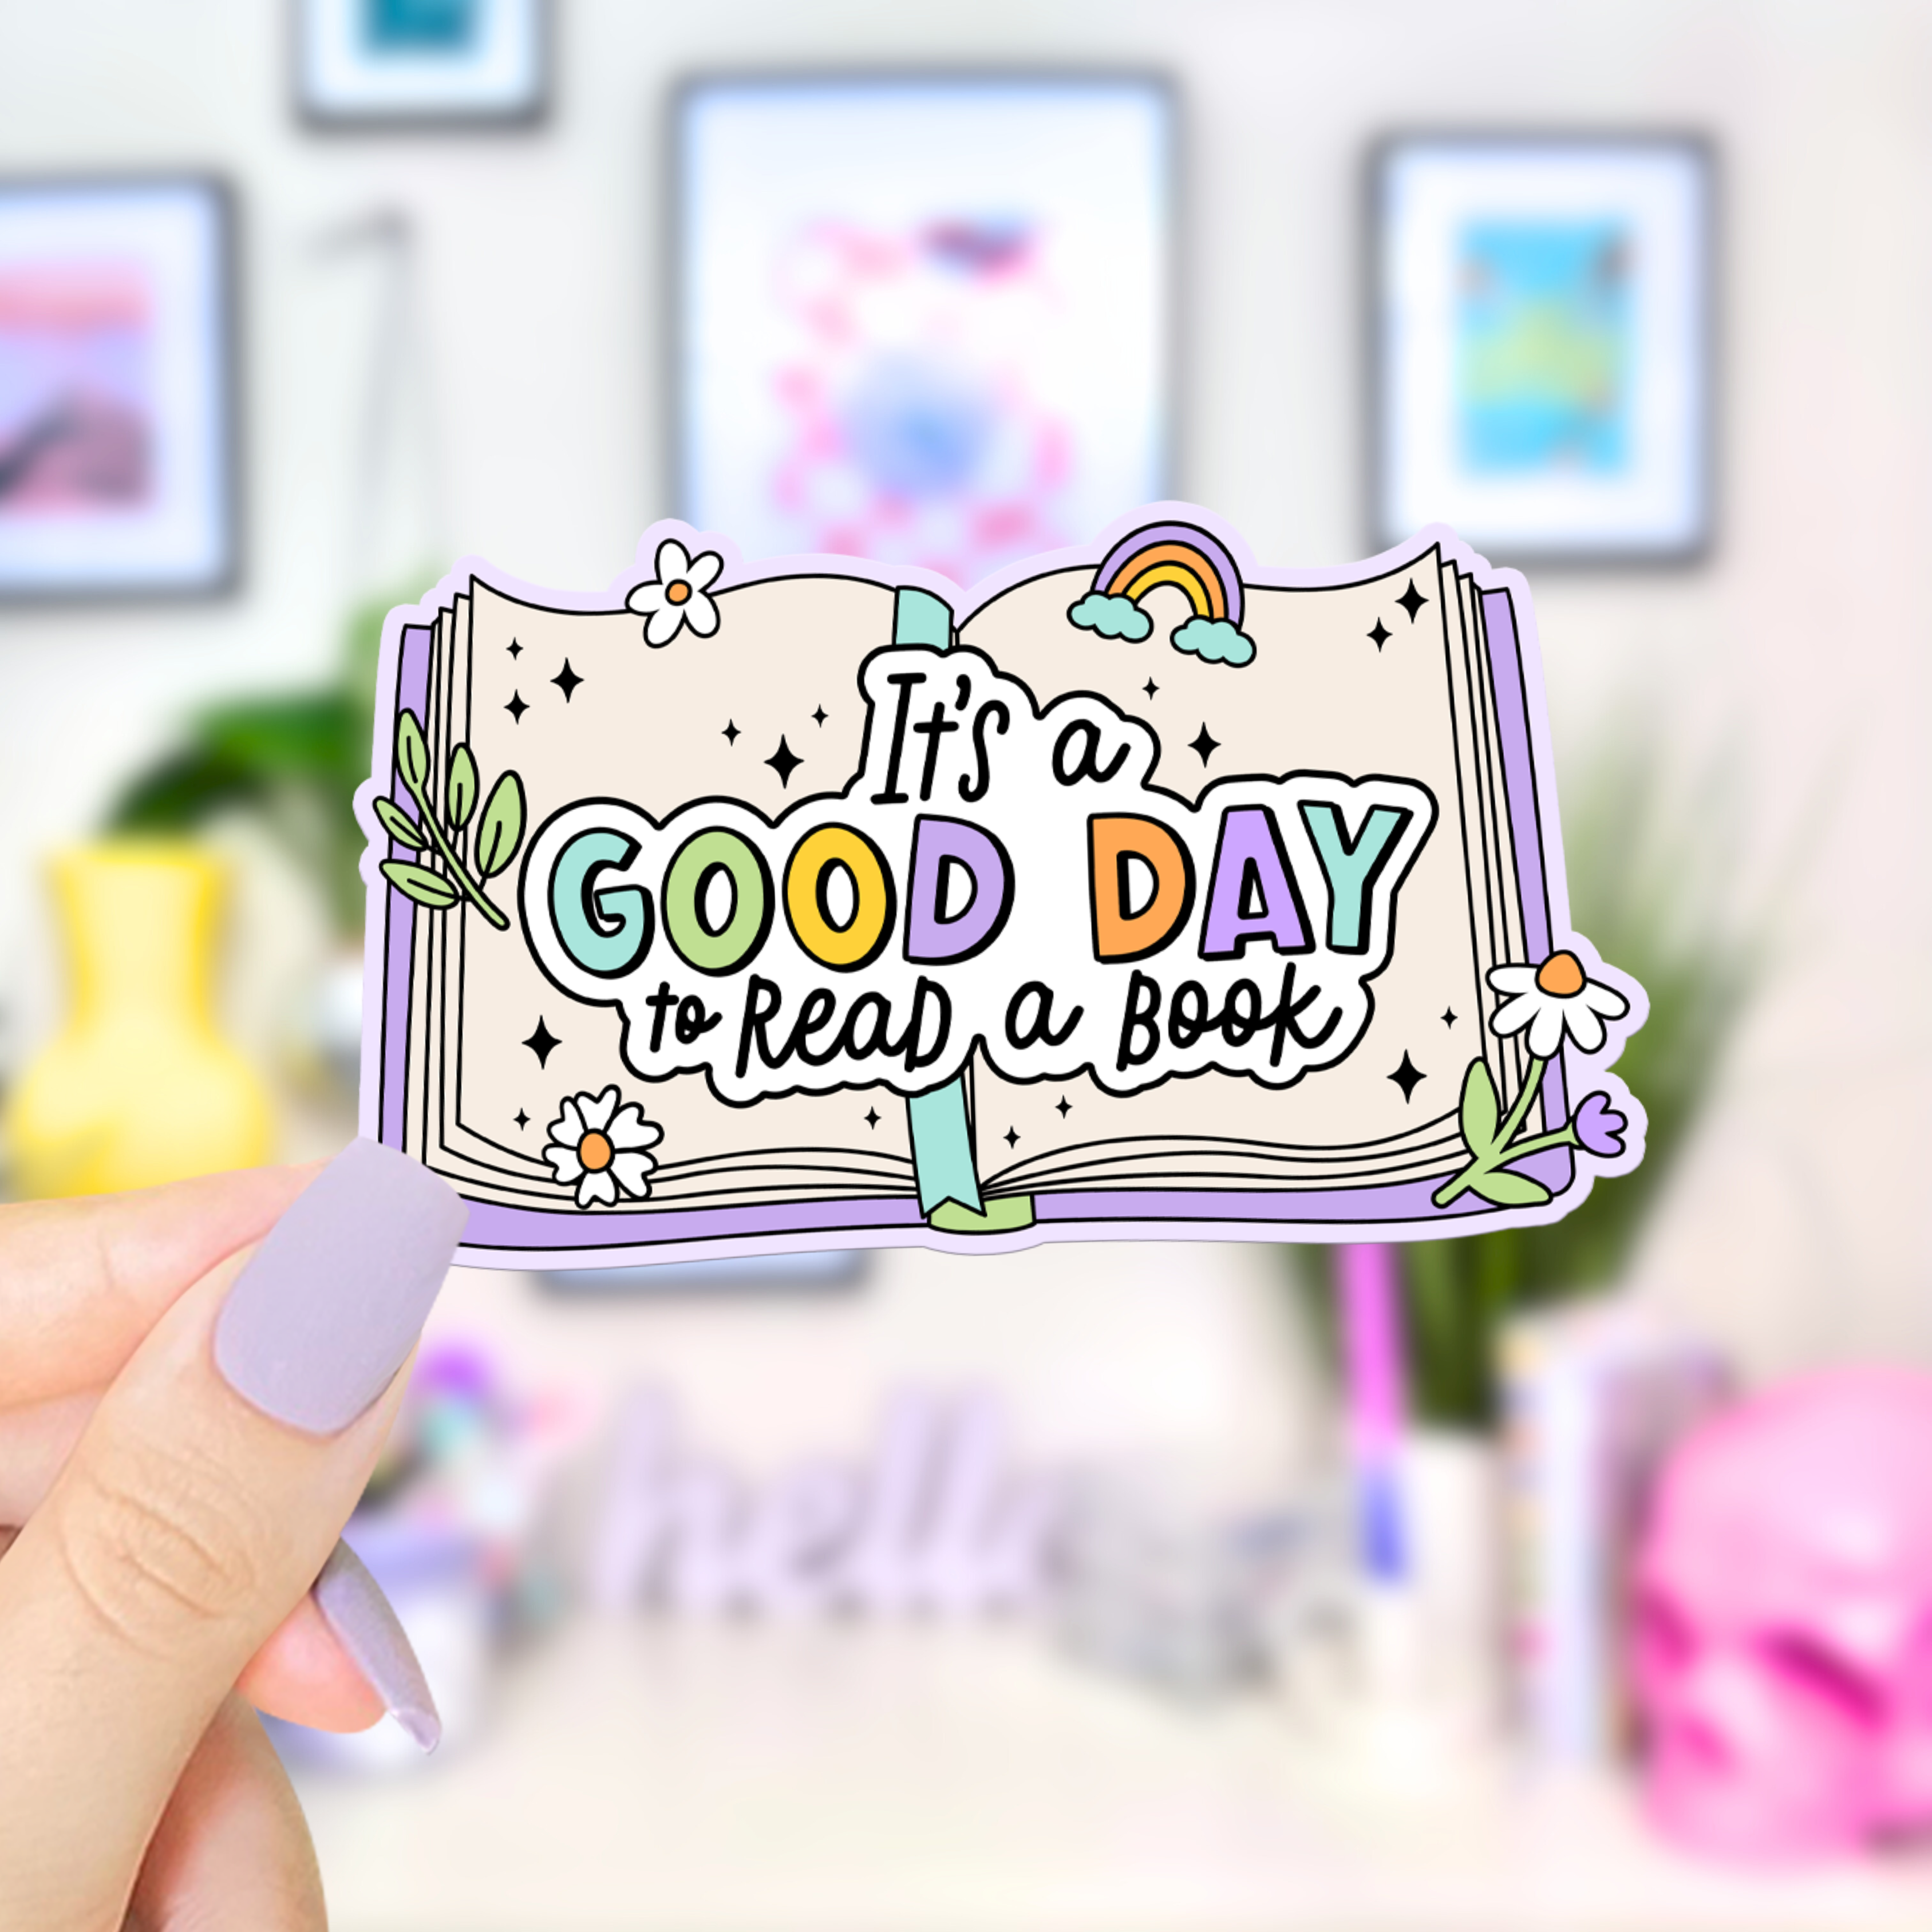 Shop Good Day To Read A Book - Waterproof Vinyl Sticker-Stickers at Ruby Joy Boutique, a Women's Clothing Store in Pickerington, Ohio